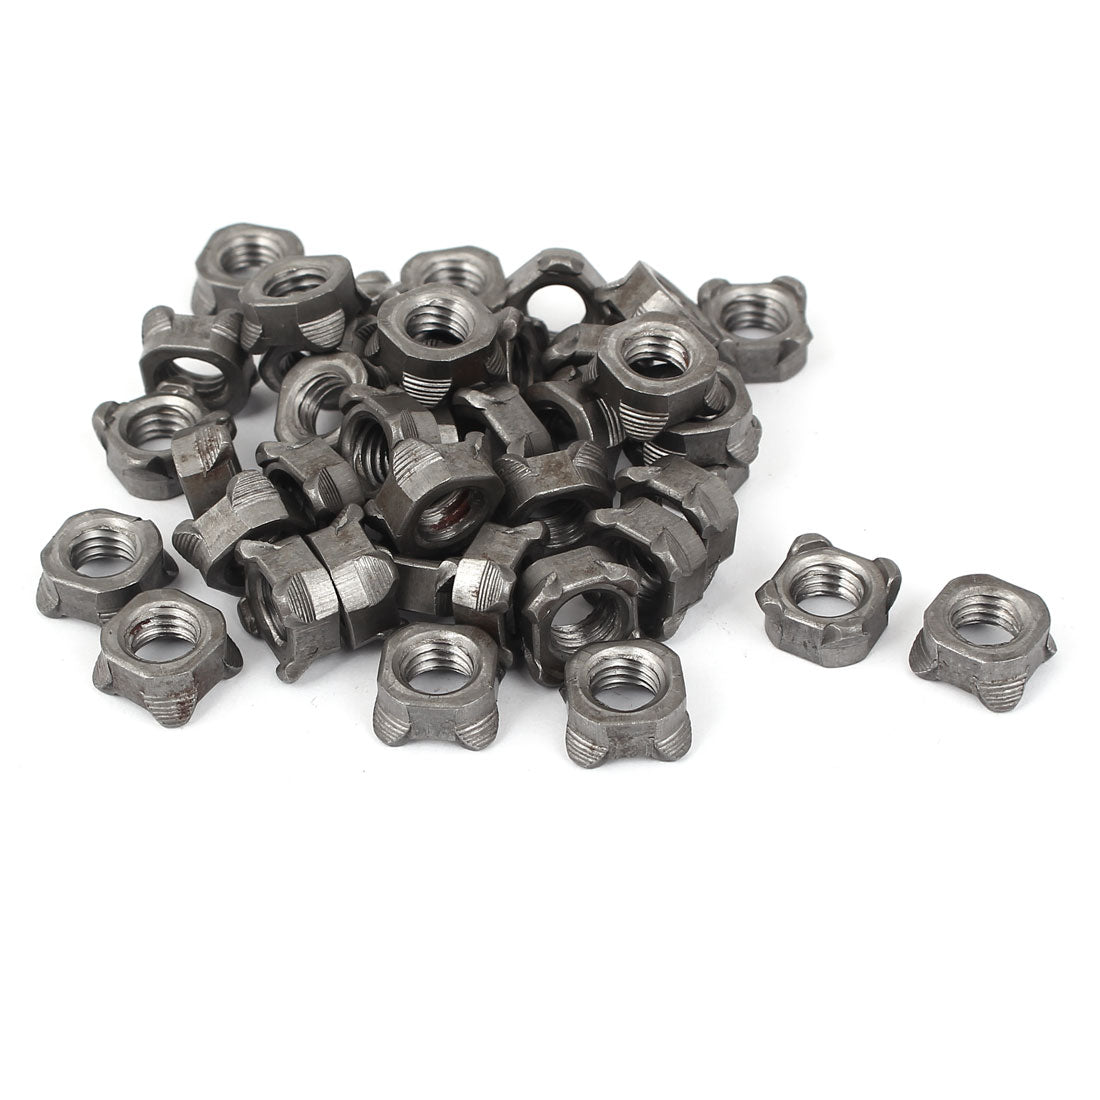 Uxcell Uxcell Weld Nuts,M10 Square UNC Carbon Steel Machine Screw Gray 40Pcs